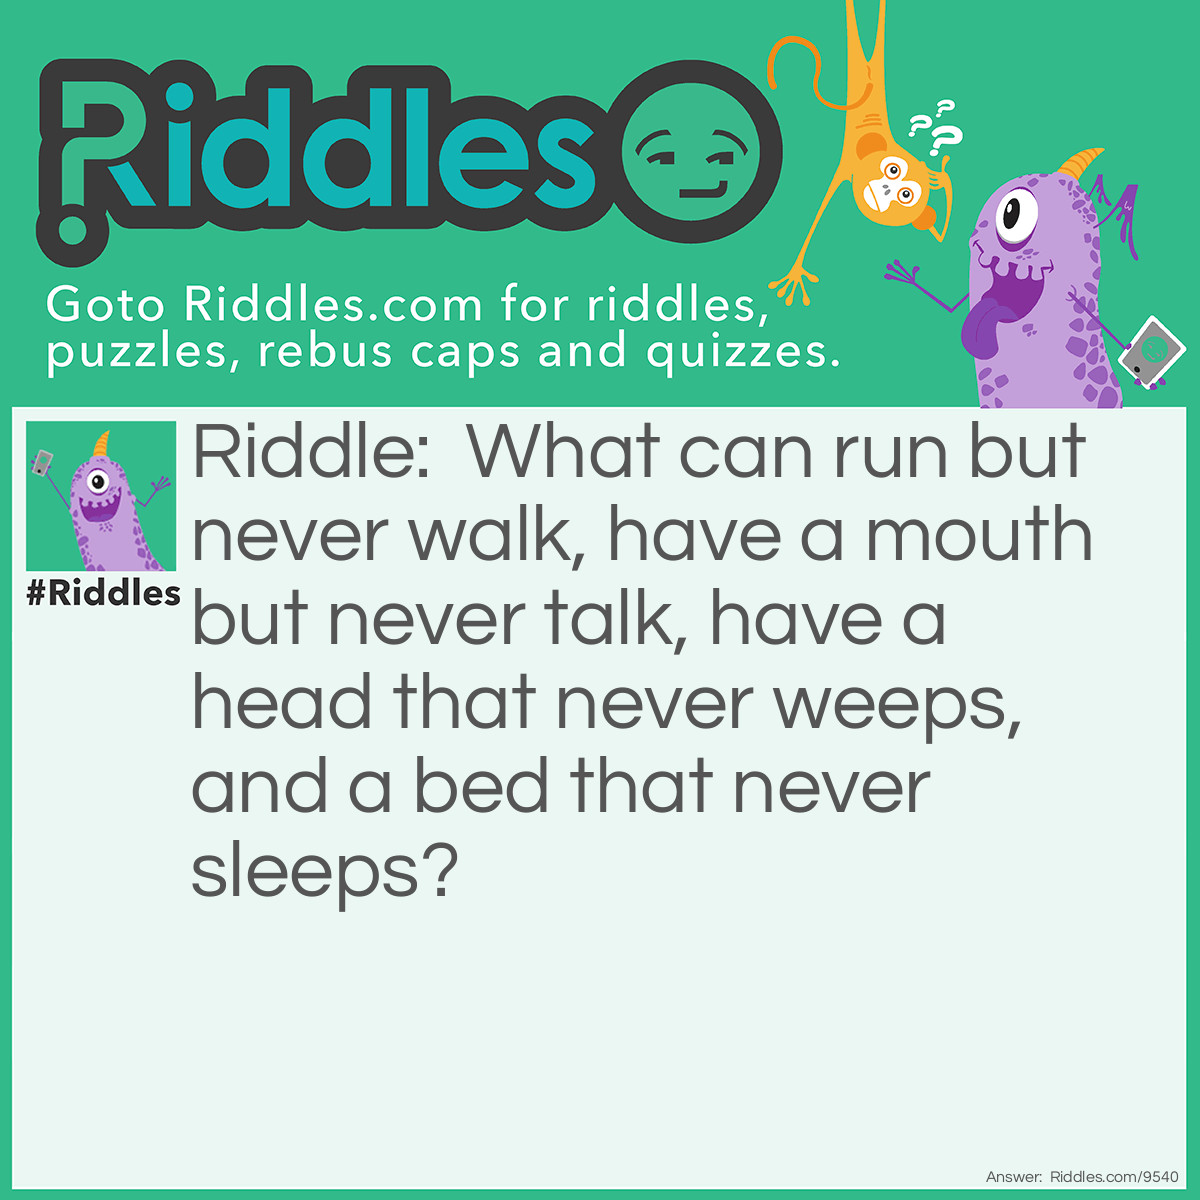 Riddle: What can run but never walk, have a mouth but never talk, have a head that never weeps, and a bed that never sleeps? Answer: A river.